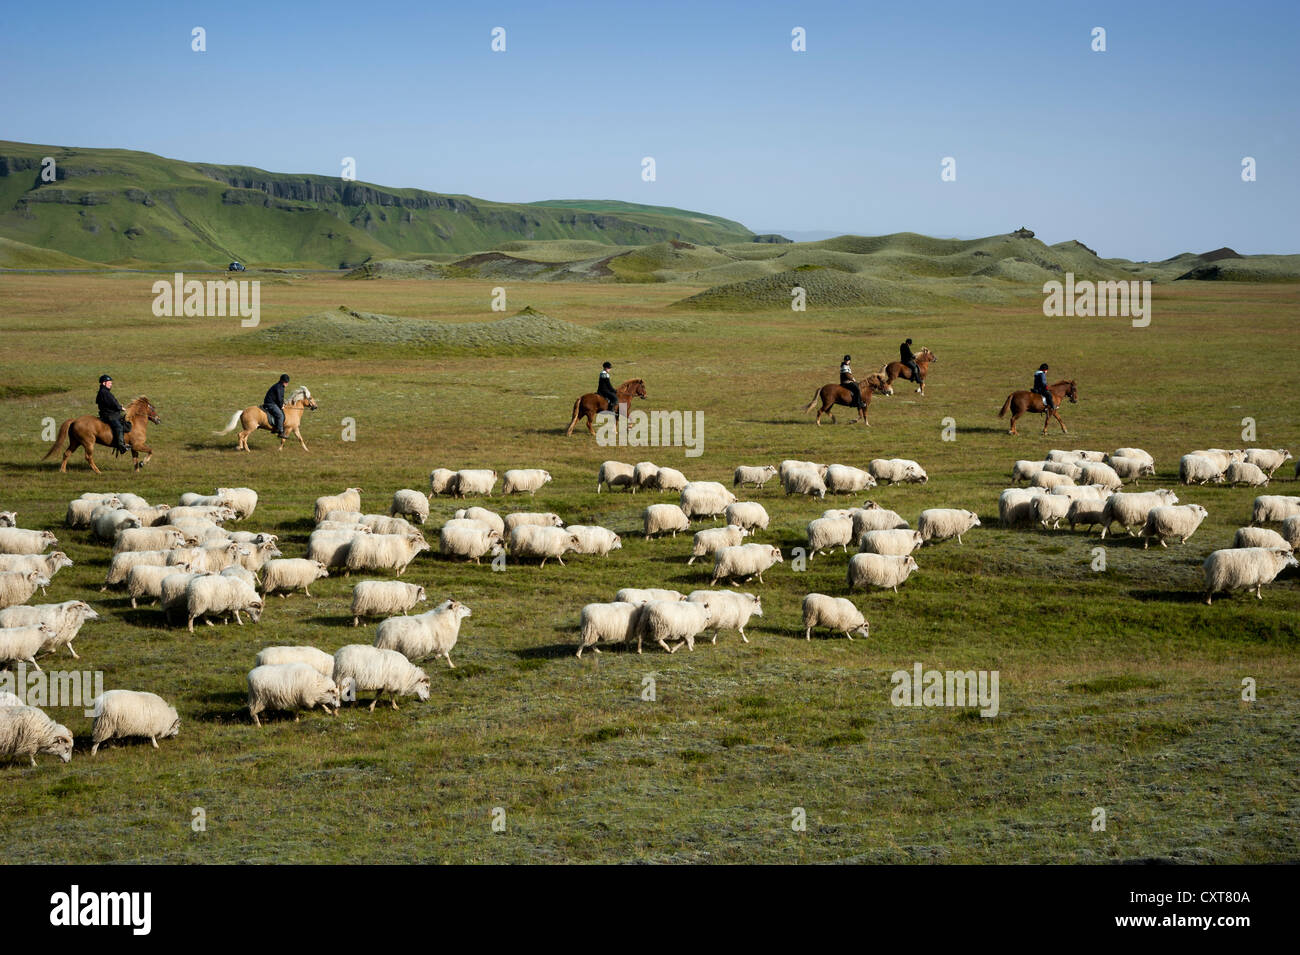 Flock of sheep on a green meadow or pasture, riders on horses, bringing down sheep in Kirkjubæjarklaustur, South Iceland Stock Photo